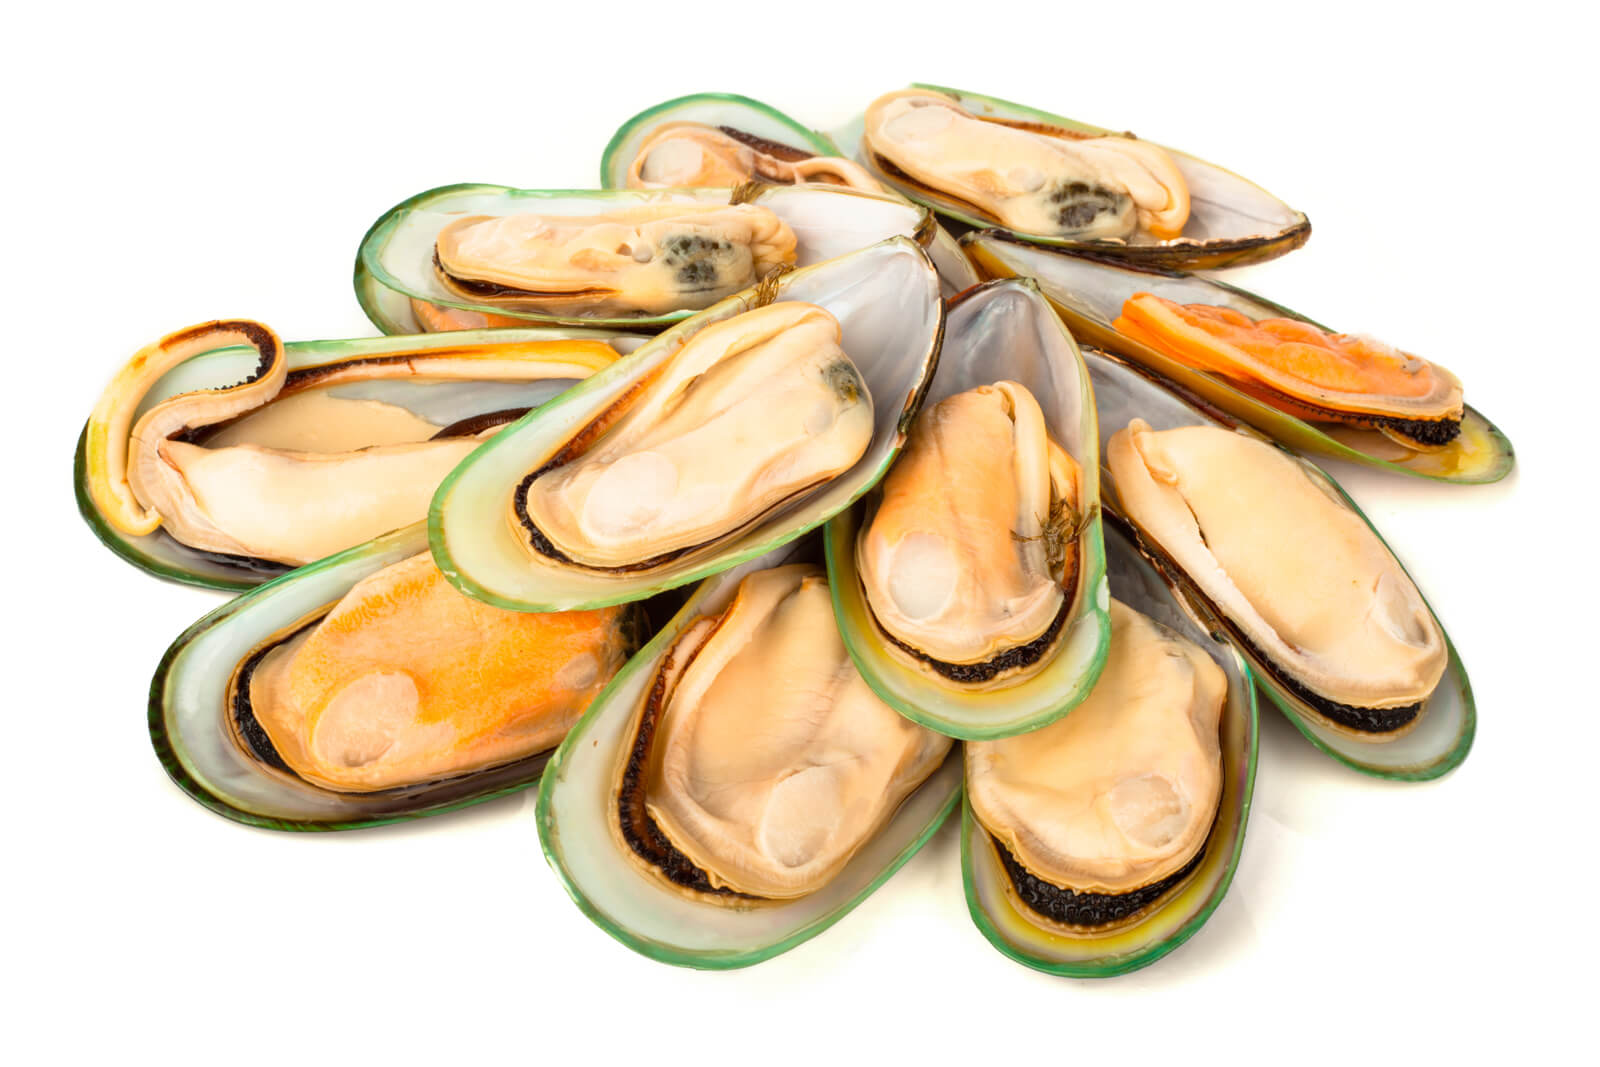 Green lipped mussels